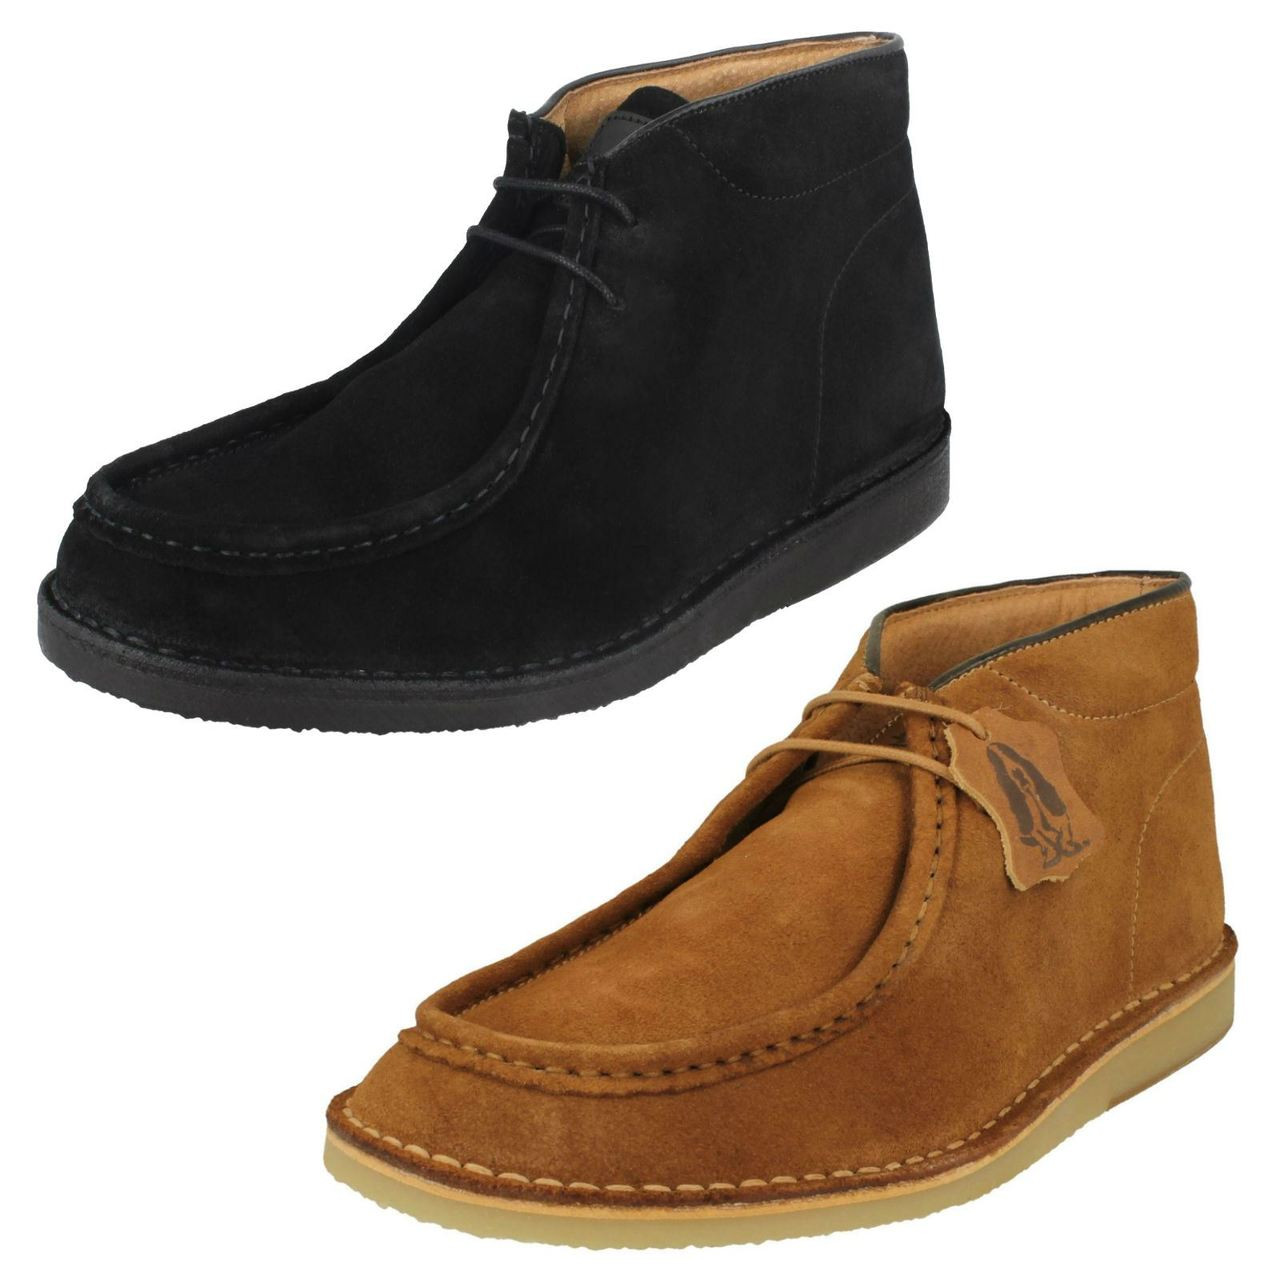 hush puppies suede boots mens